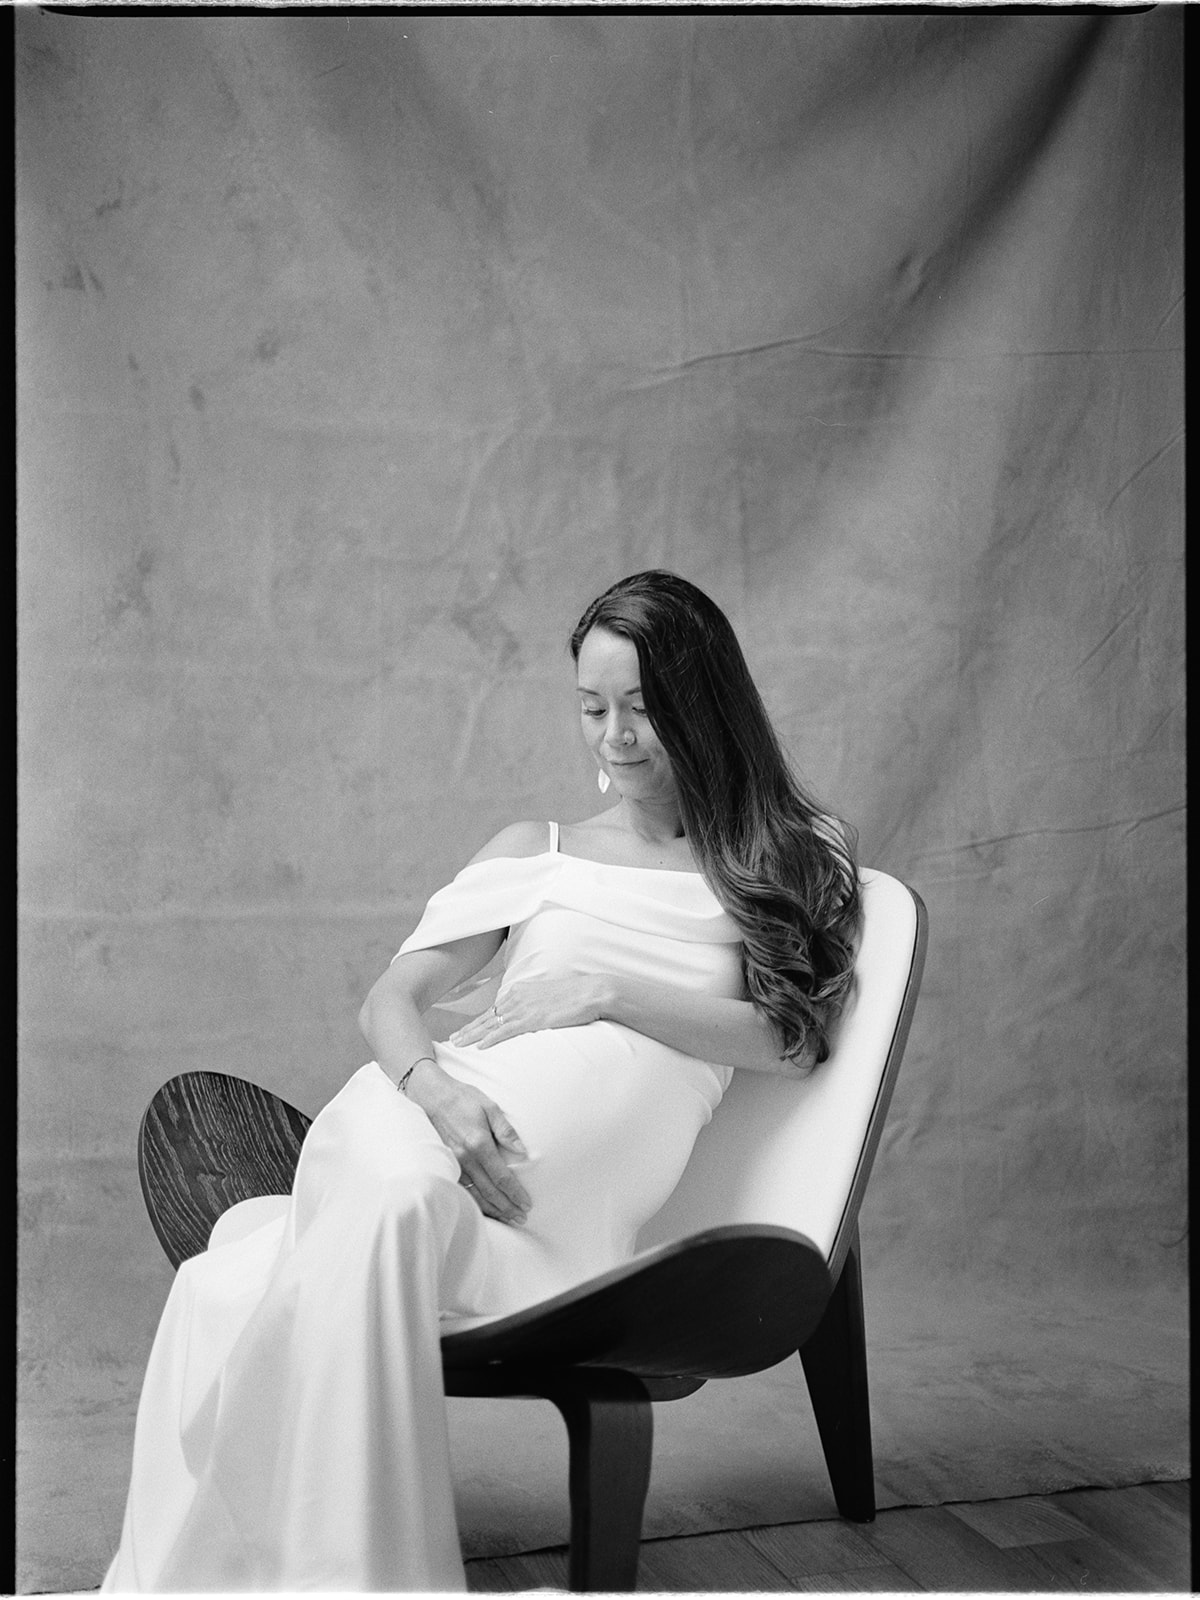 A pregnant woman in a white dress holding her baby bump while sitting in a chair.